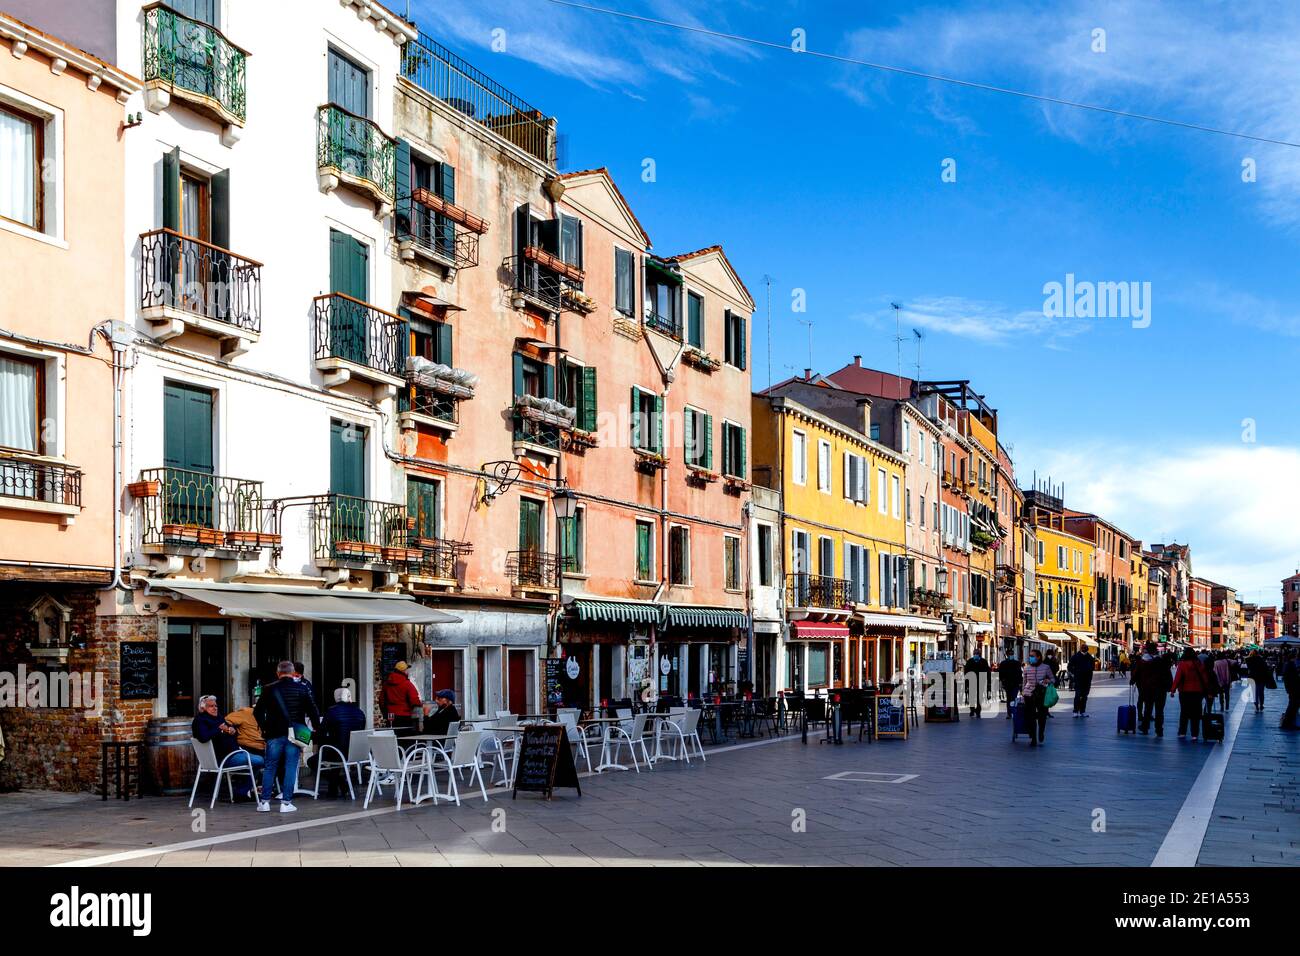 A Typical Street In The Castello District Of Venice, Italy. Stock Photo